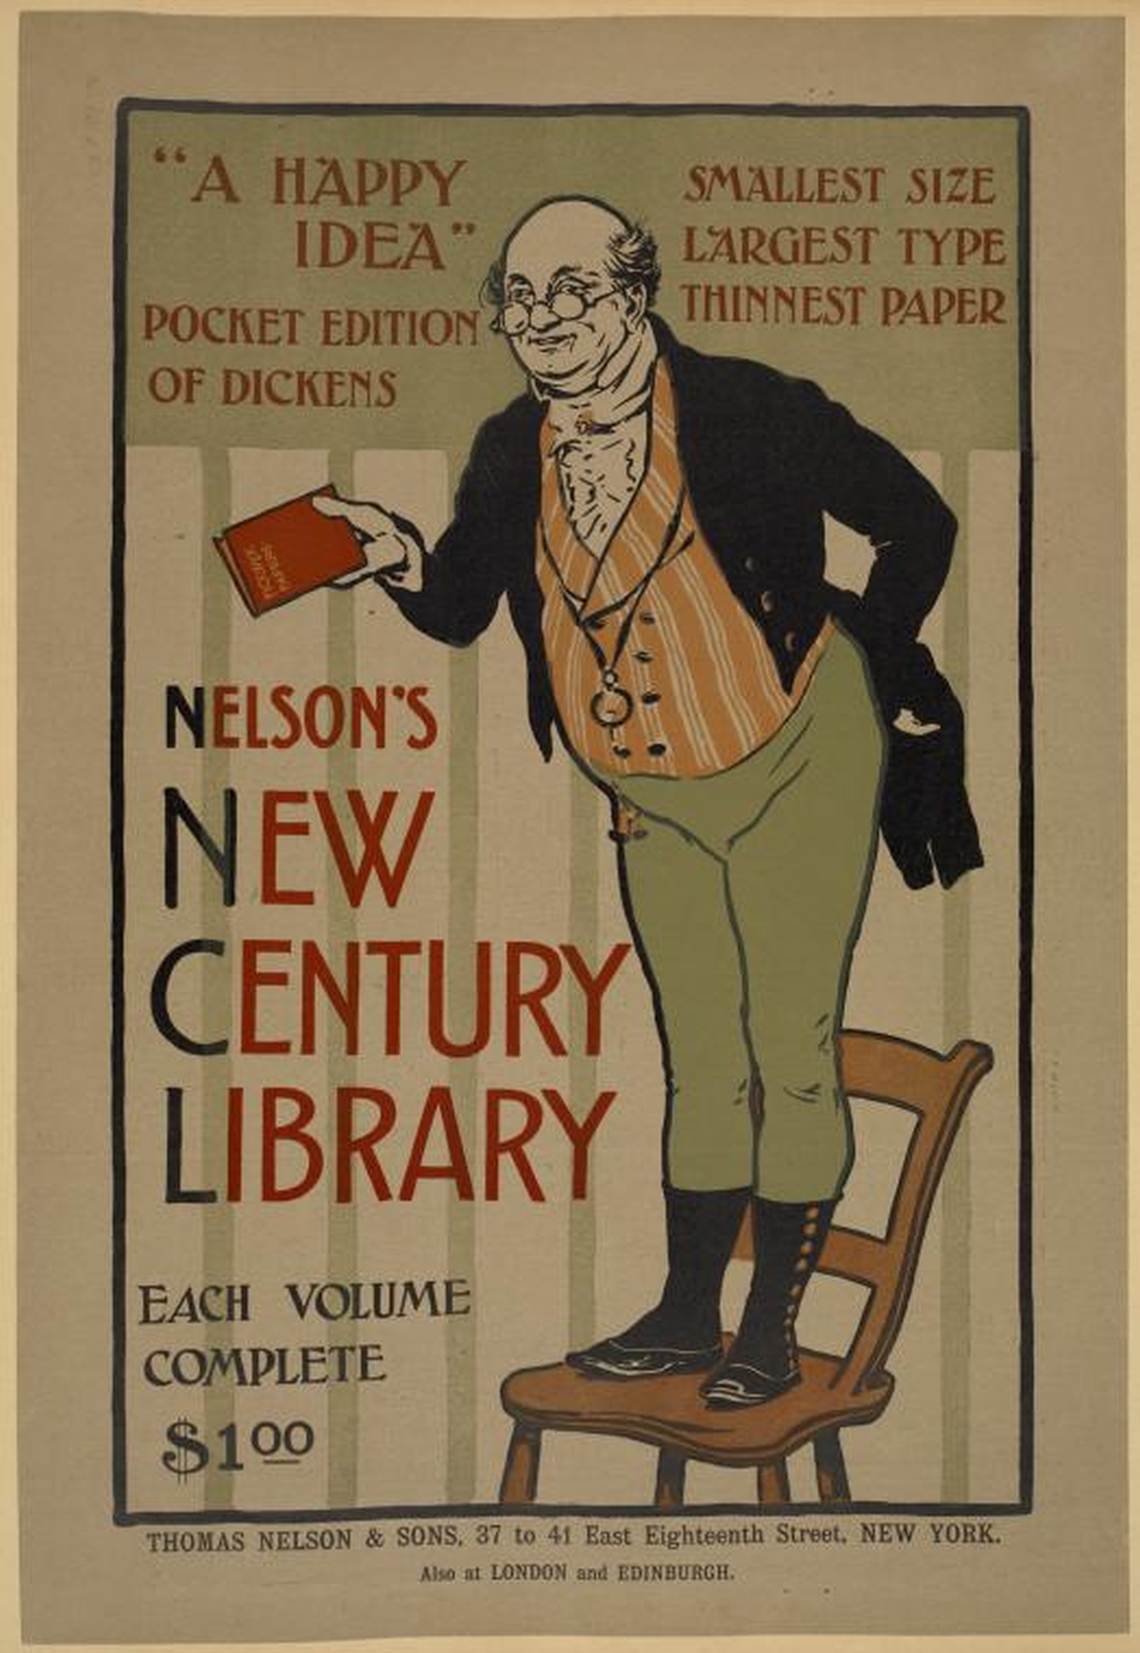 Advertisement for the New Century Book collection published by Thomas Nelson and Sons in New York